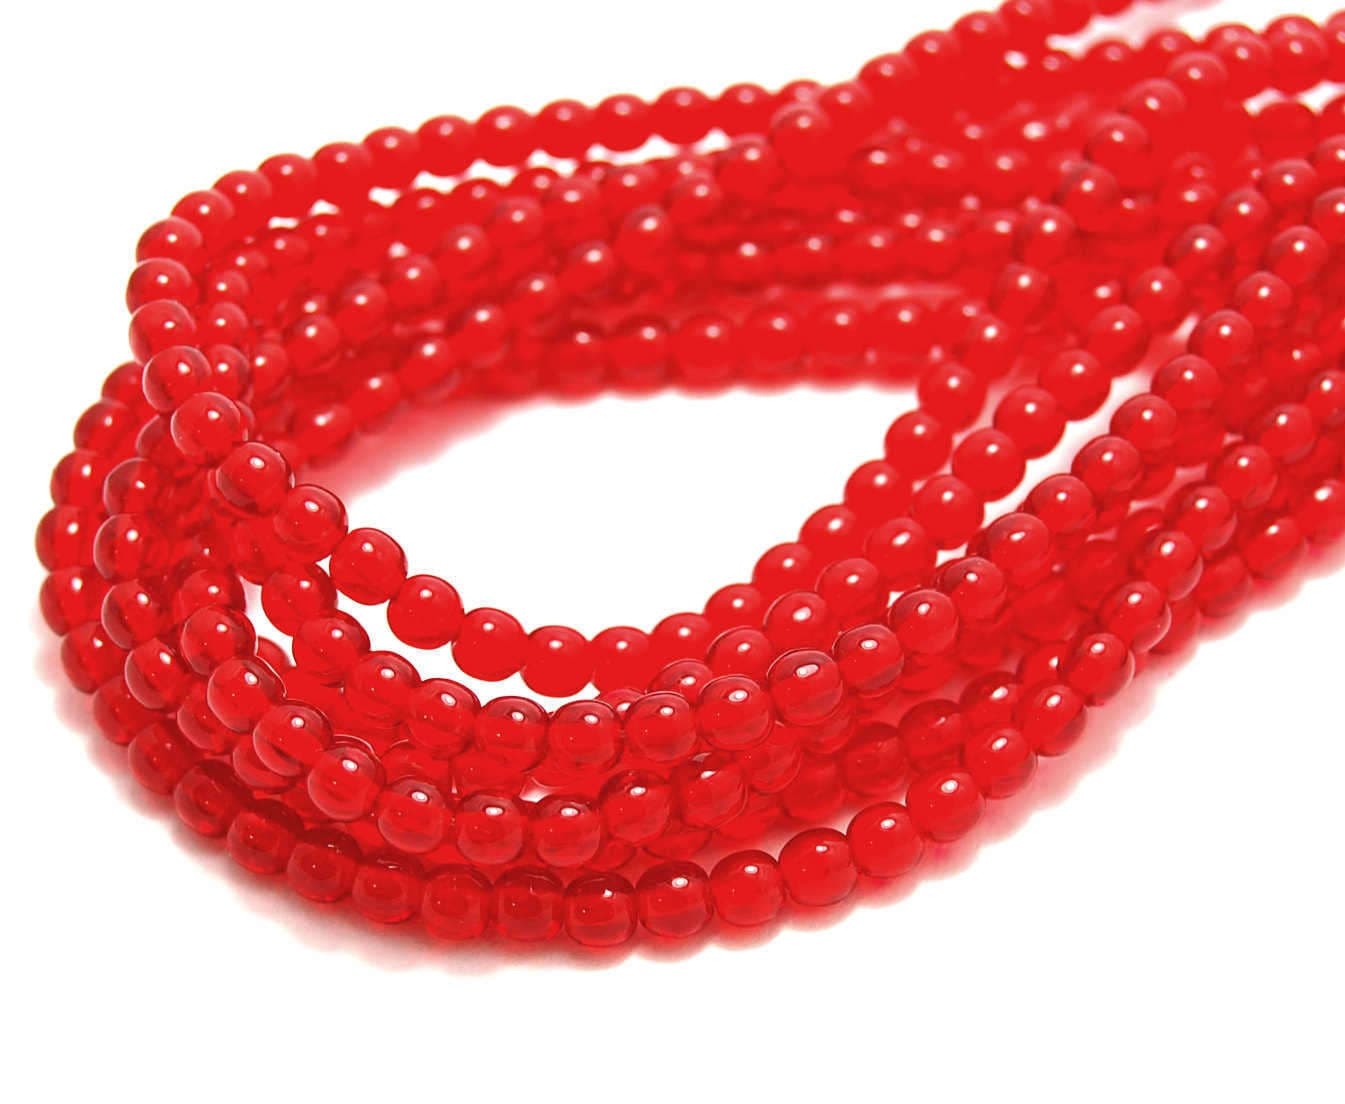 200 Siam Ruby Czech Glass Rondelle Beads 4MM 